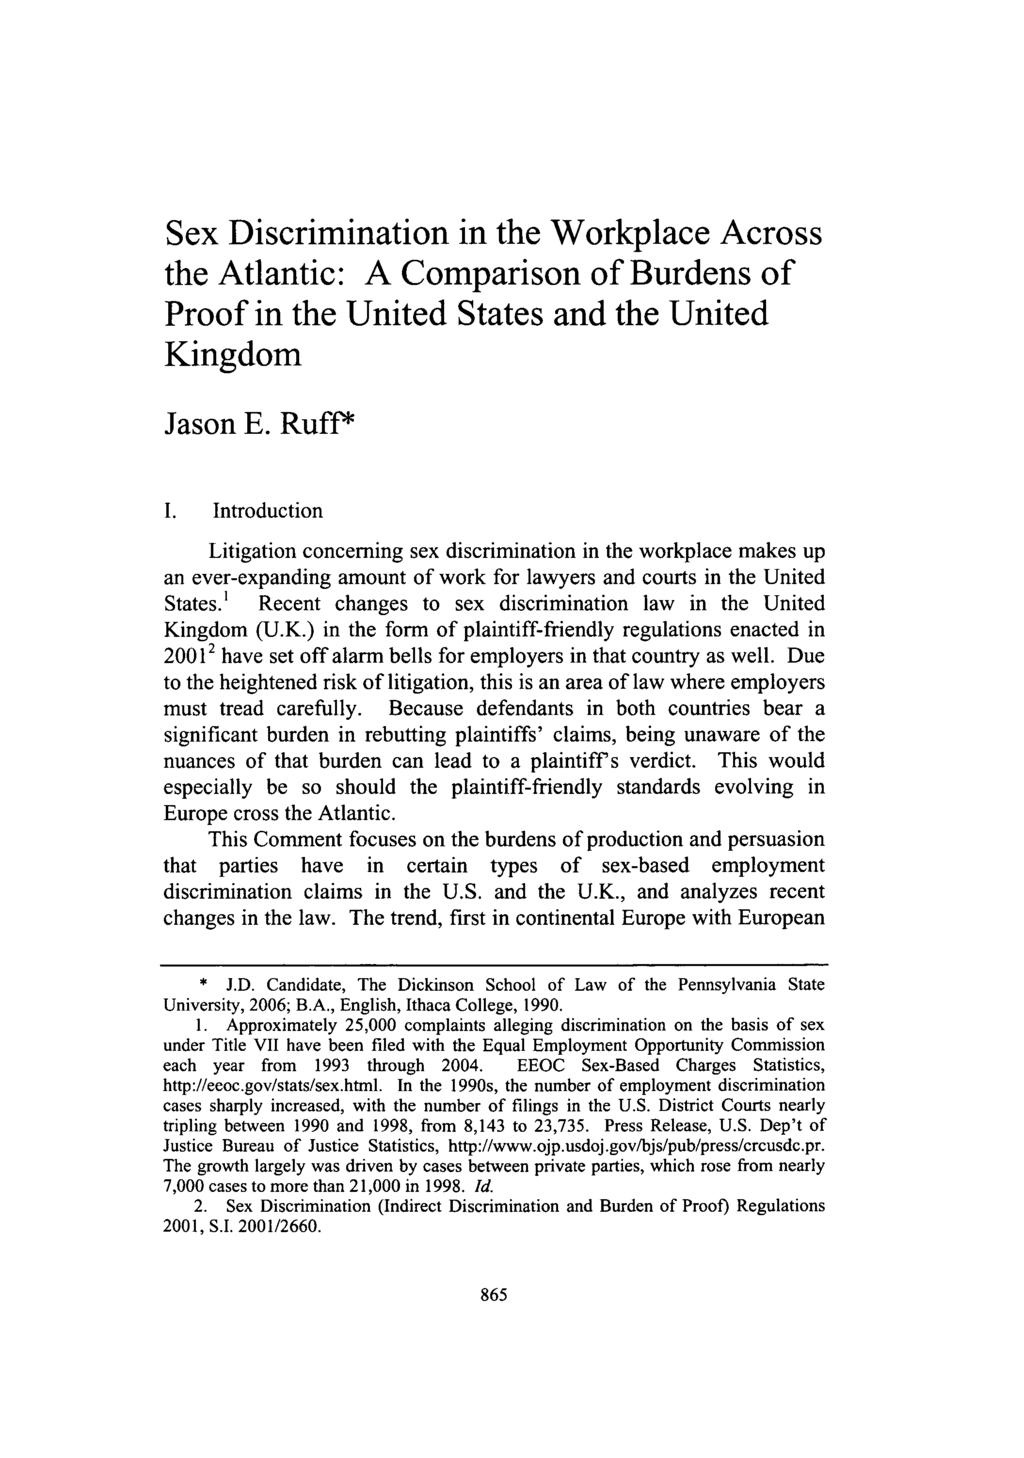 Sex Discrimination in the Workplace Across the Atlantic: A Comparison of Burdens of Proof in the United States and the United Kingdom Jason E. Ruff* I.